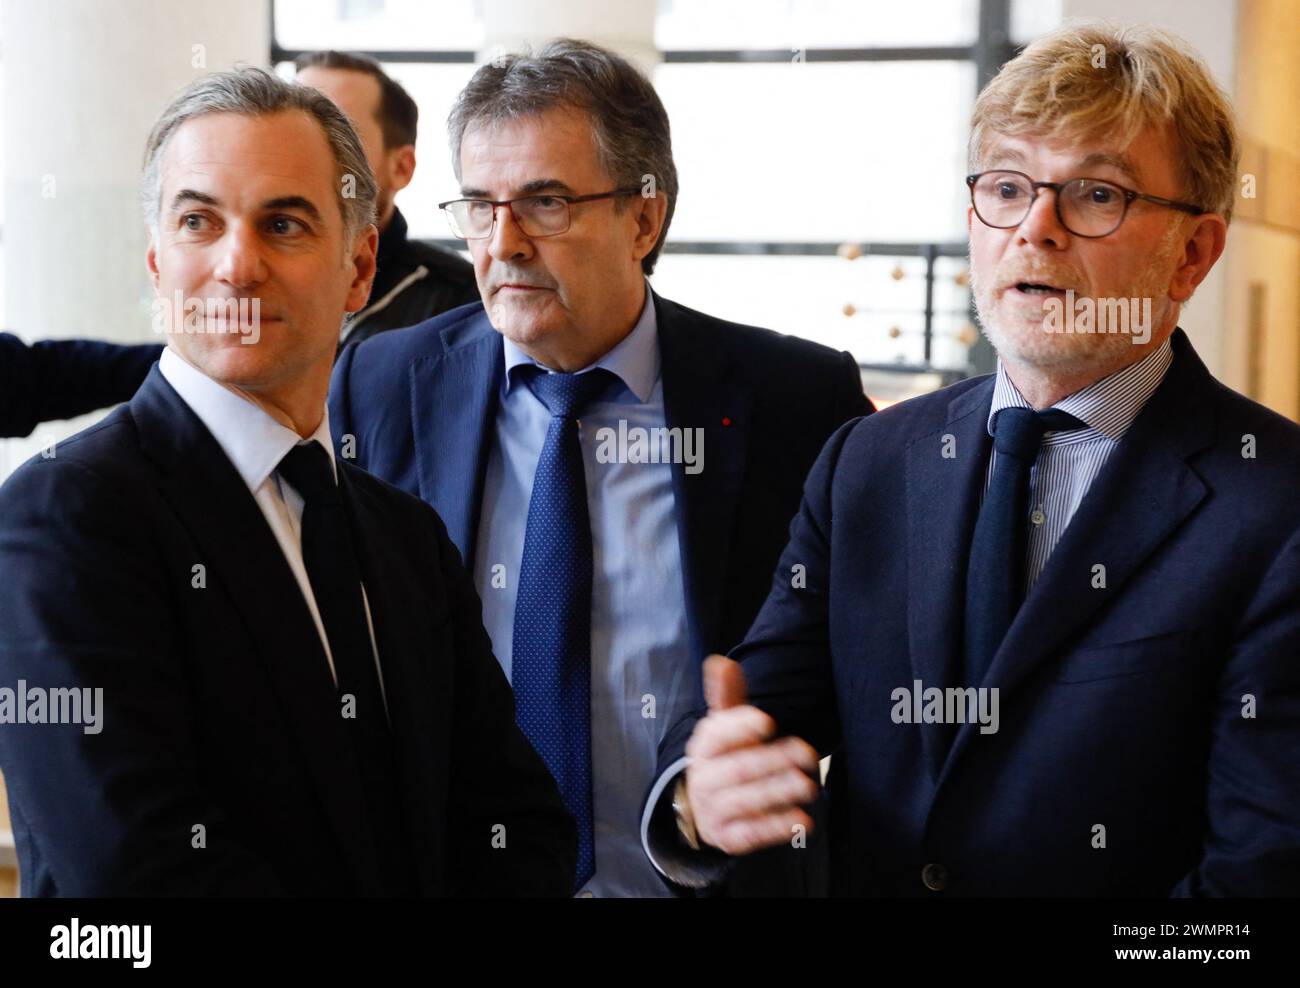 Paris, France. 27th Feb, 2024. Chief Executive of French bank Credit Agricole, Philippe Brassac, President of the French Banking Federation, Nicolas Namias and Minister for Agriculture and Food Sovereignty Marc Fesneau duing a meeting of the French Banking Federation to address support measures for the agricultural sector in Paris, France, on February 27, 2024. Photo by Vernier/JBV NEWS/ABACAPRESS.COM Credit: Abaca Press/Alamy Live News Stock Photo